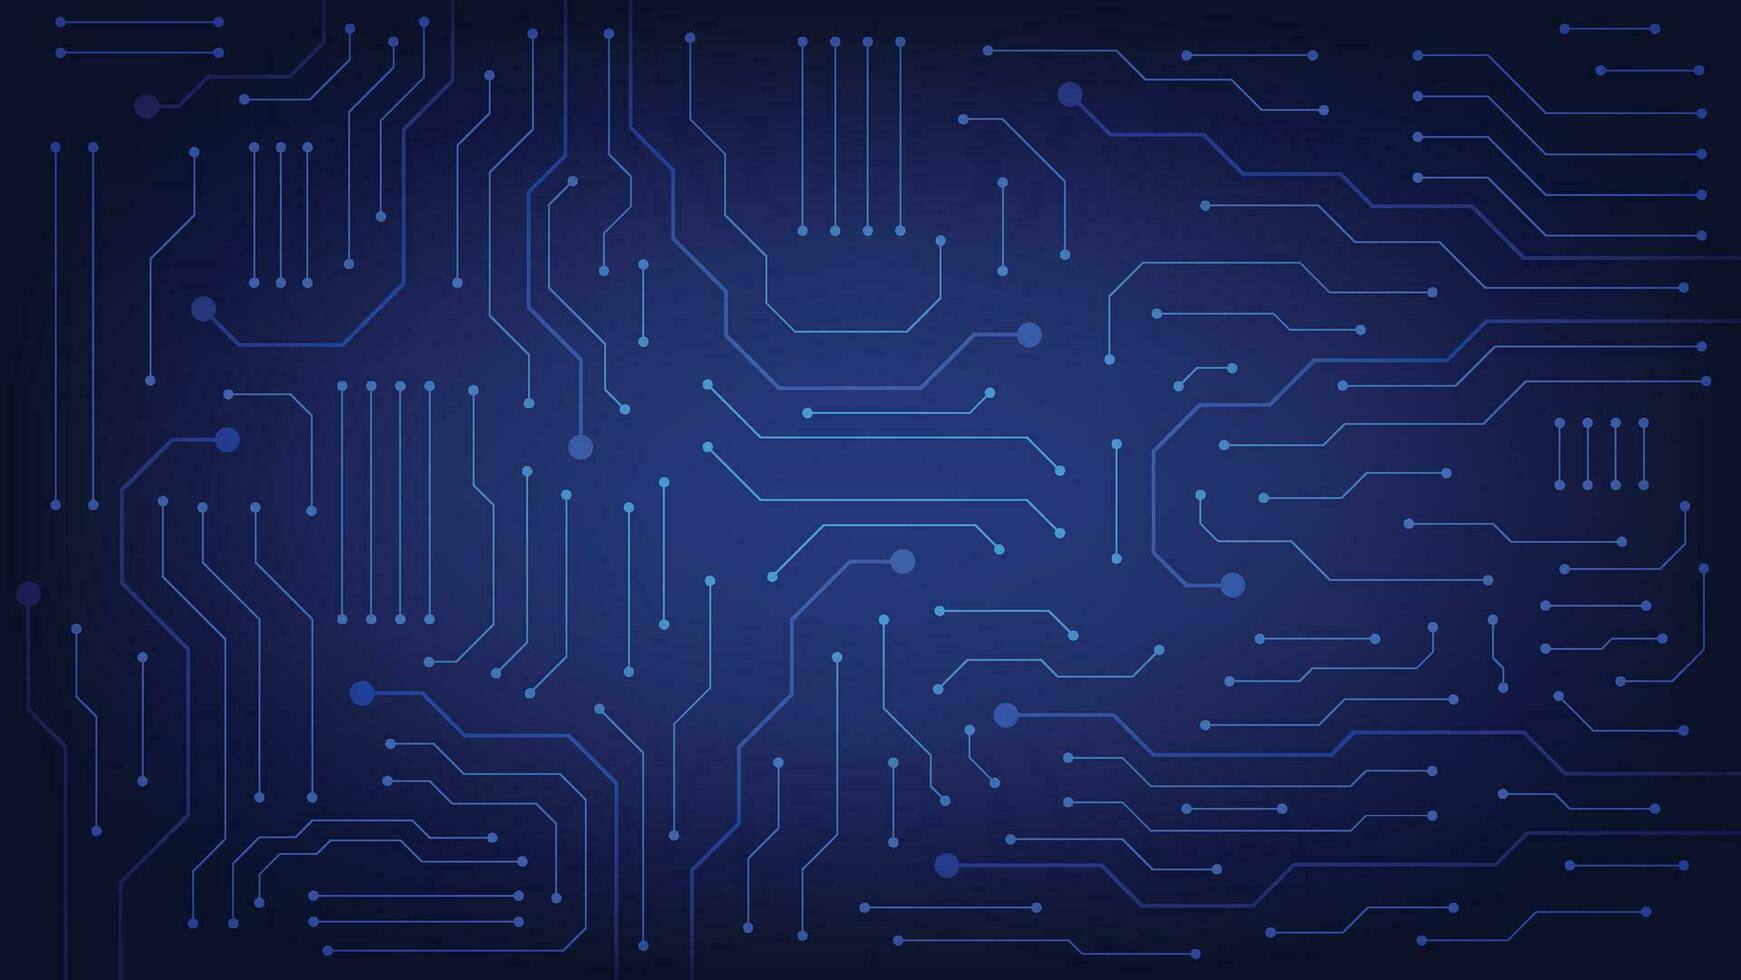 Hi tech digital circuit board. AI pad and electrical lines connected on blue lighting background. futuristic technology design element concept vector